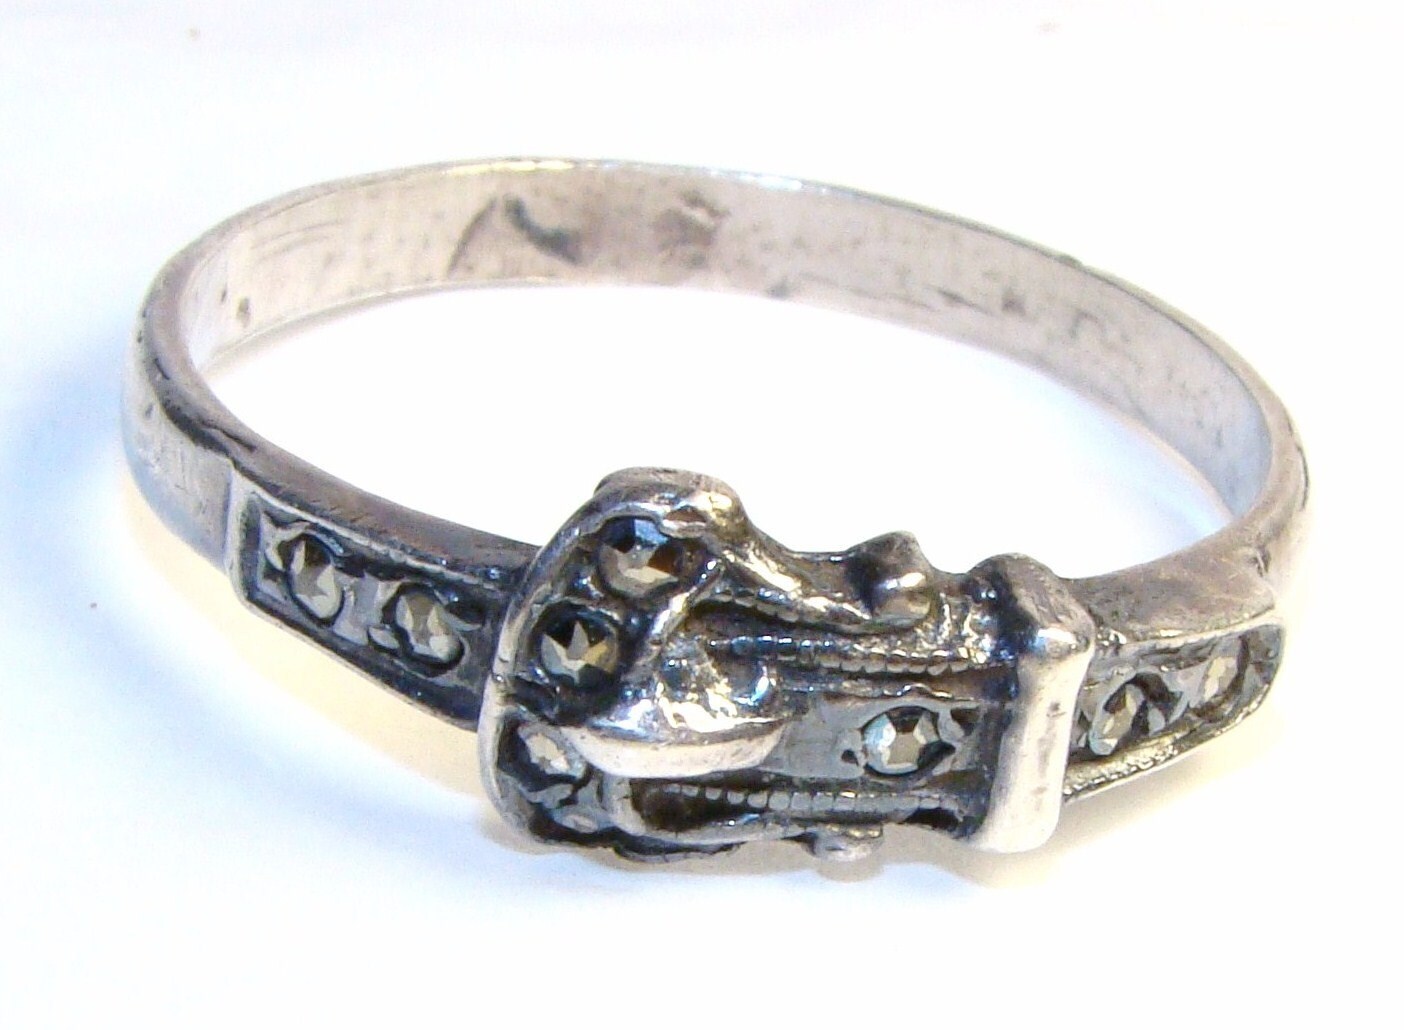 Antique Sterling Silver Belt Buckle Ring with Marcasites